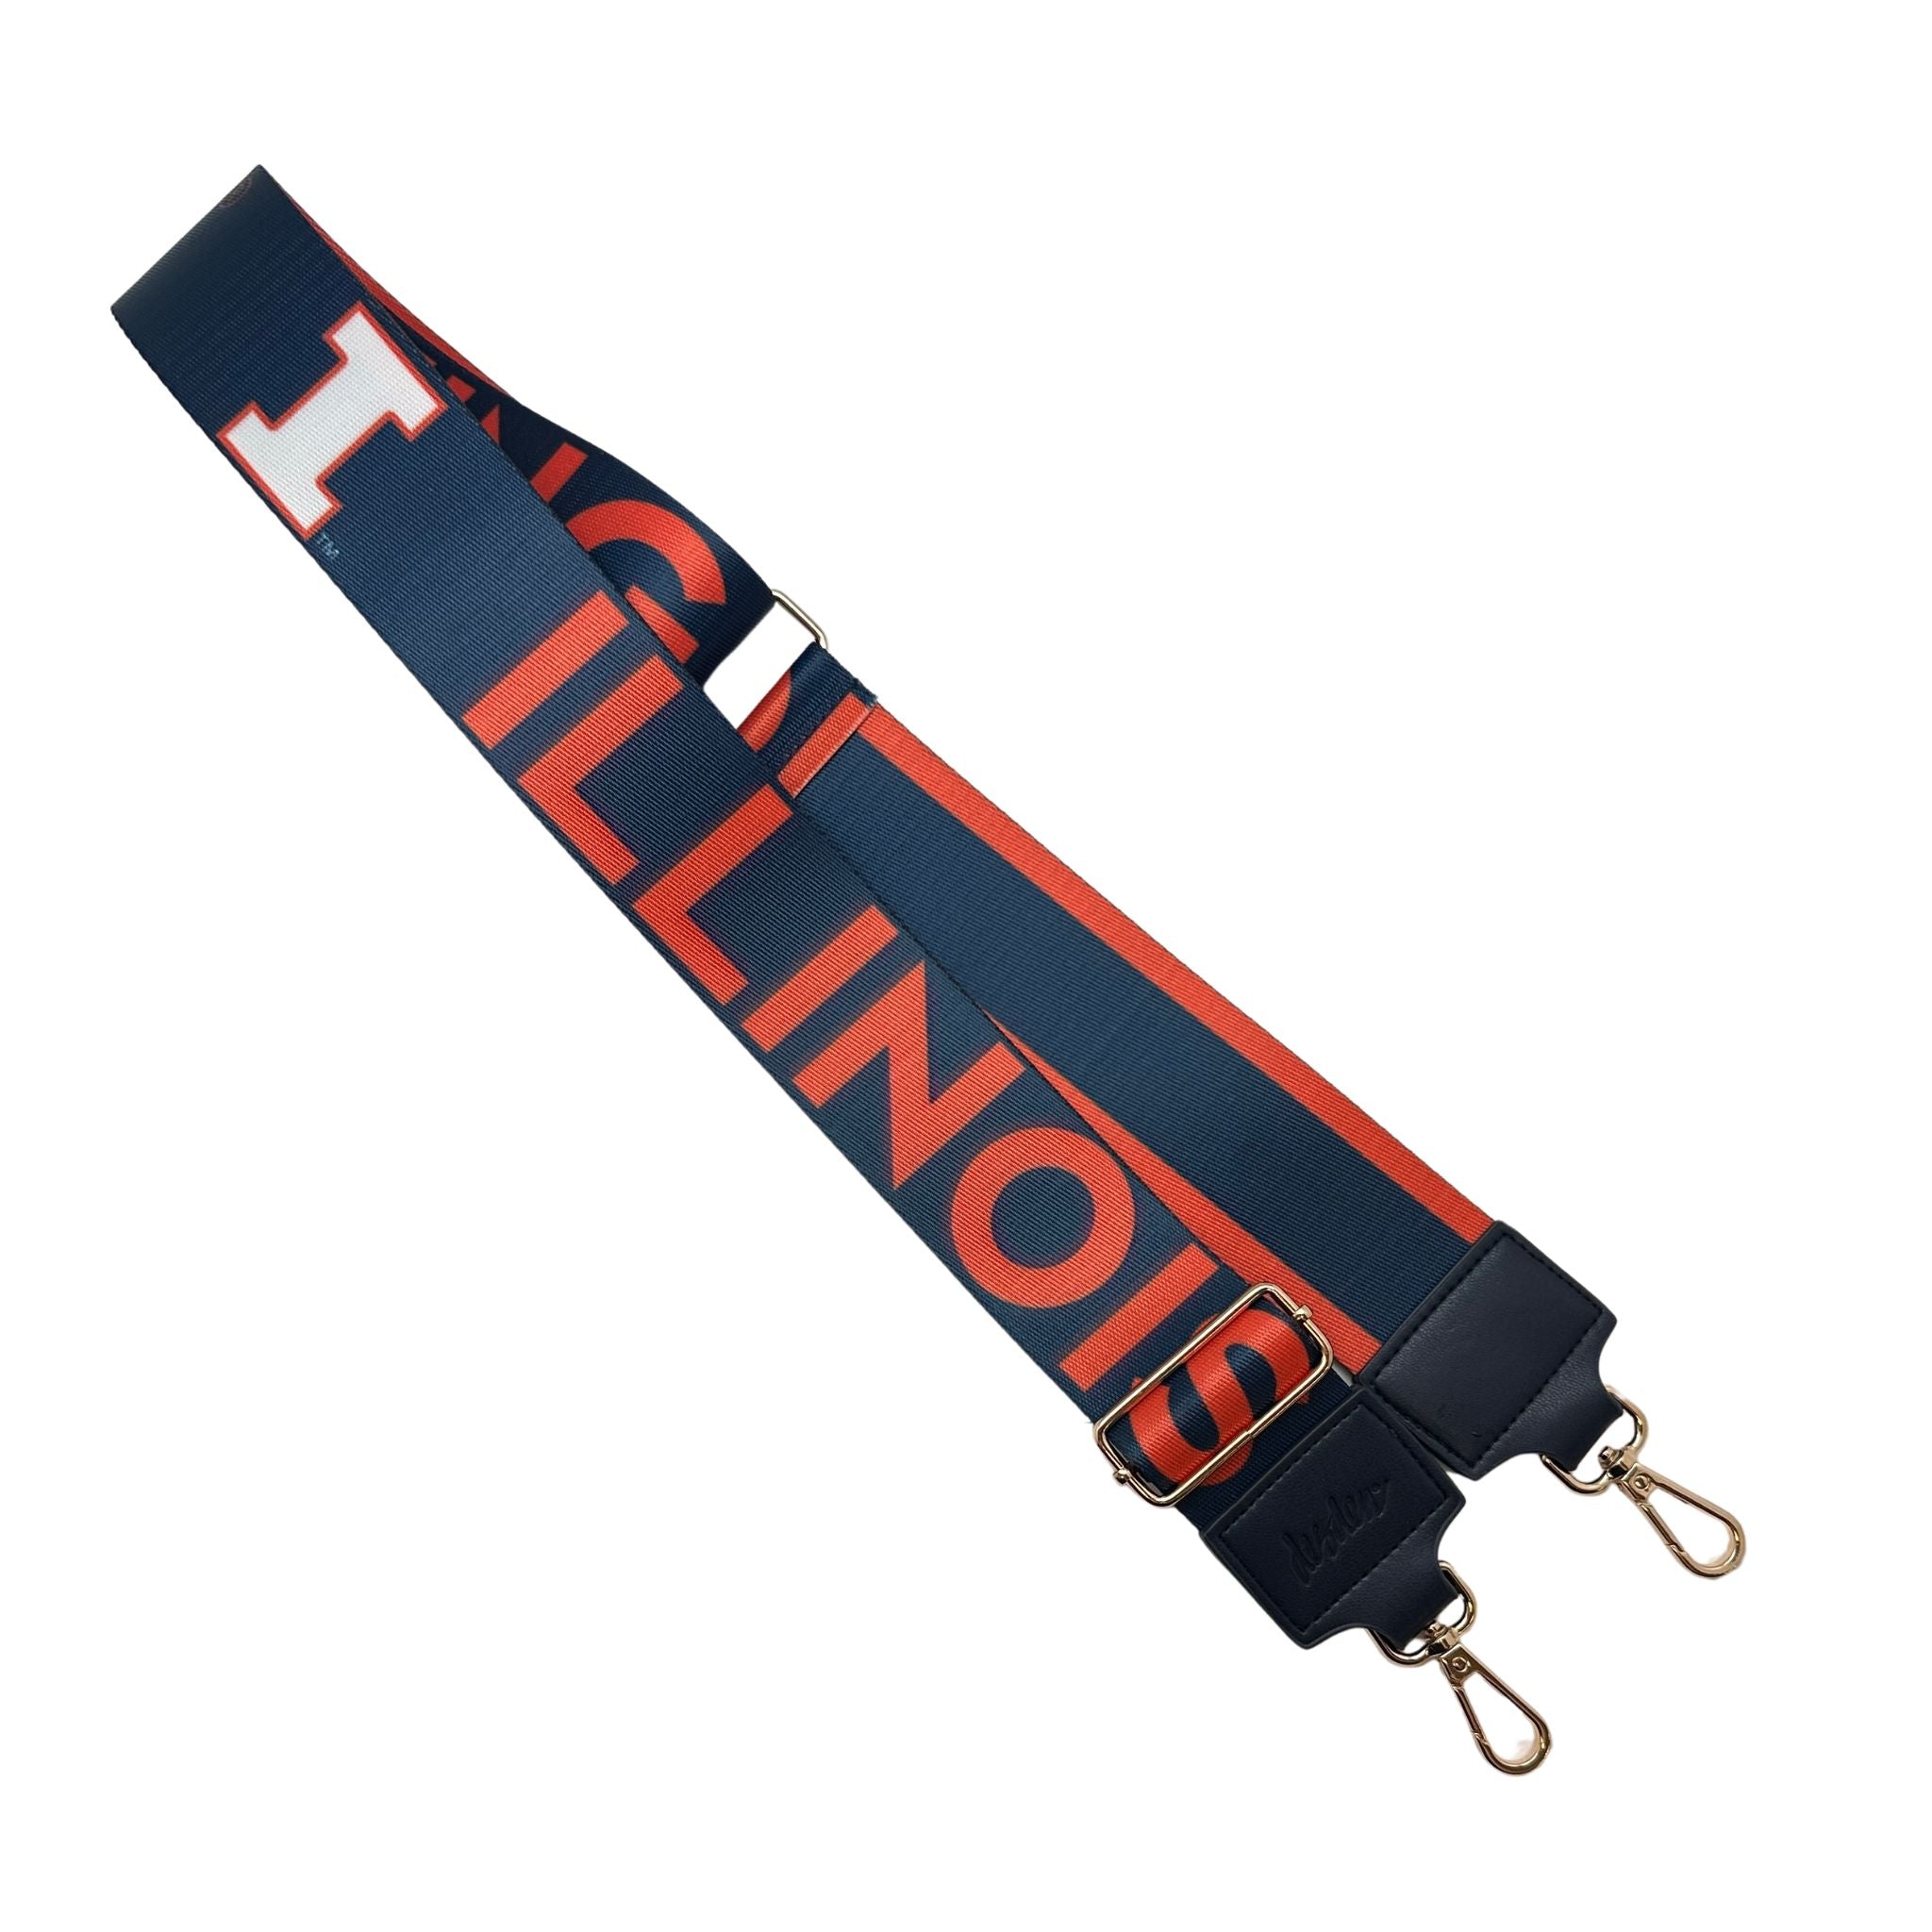 ILLINOIS 2" - Officially Licensed - Stripe